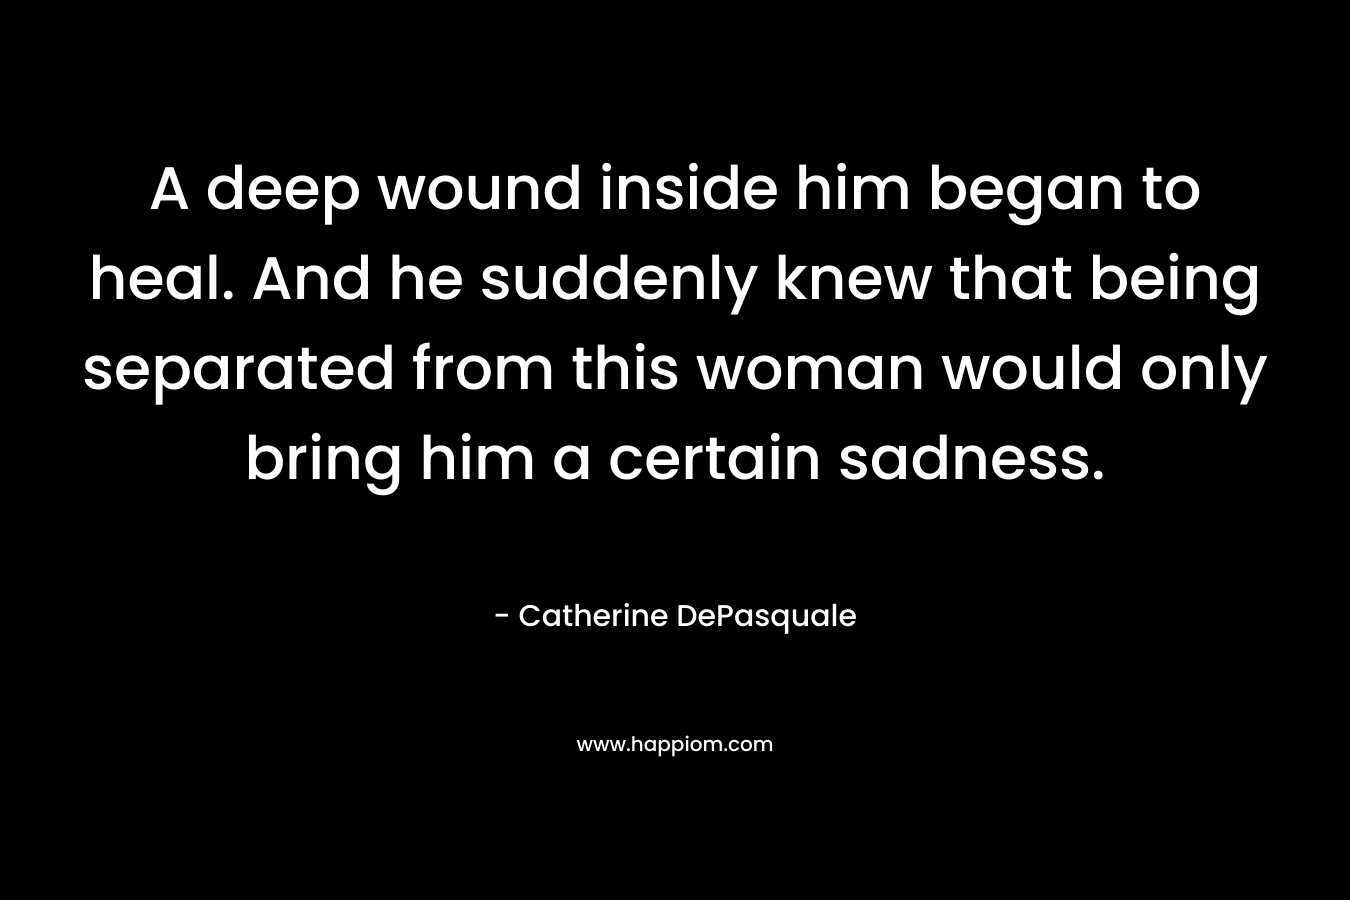 A deep wound inside him began to heal. And he suddenly knew that being separated from this woman would only bring him a certain sadness. – Catherine DePasquale